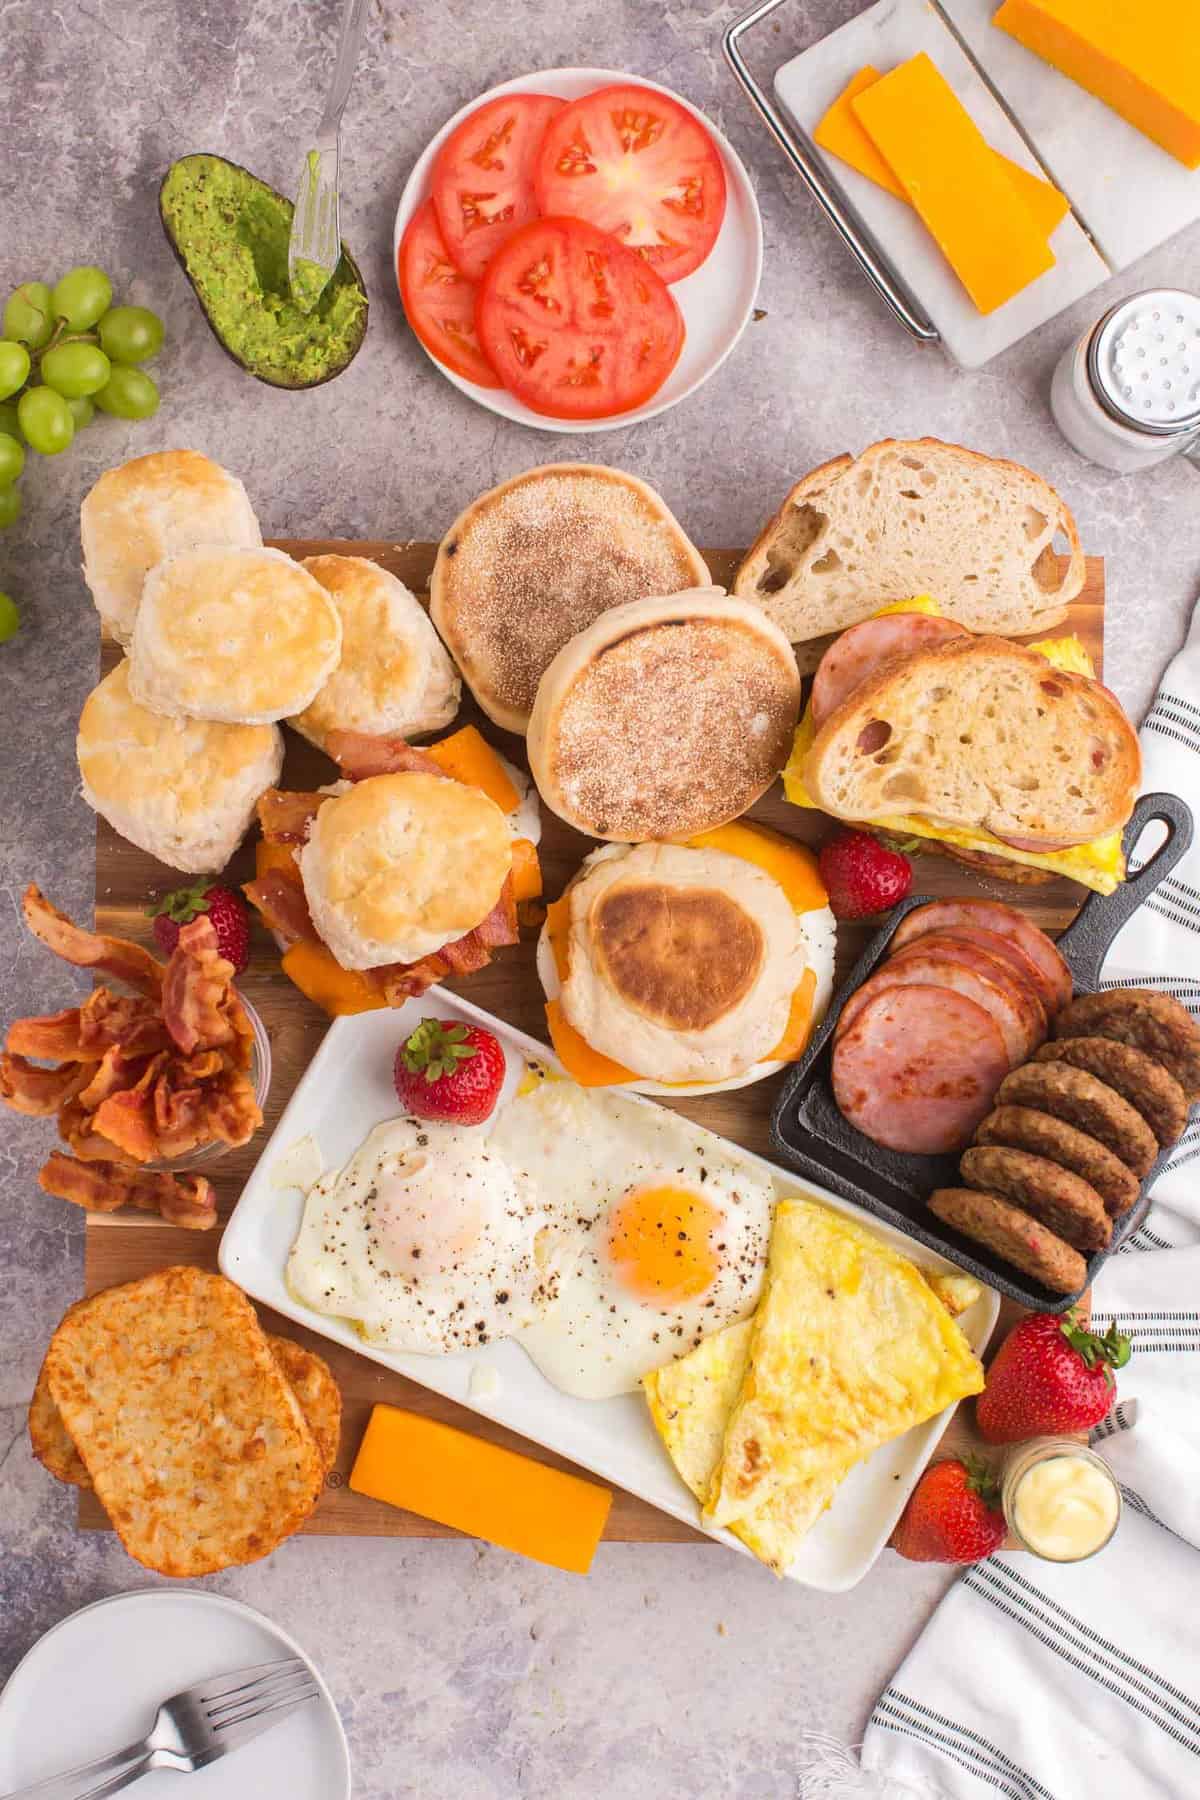 Egg sandwich board with a variety of bread choices and toppings.